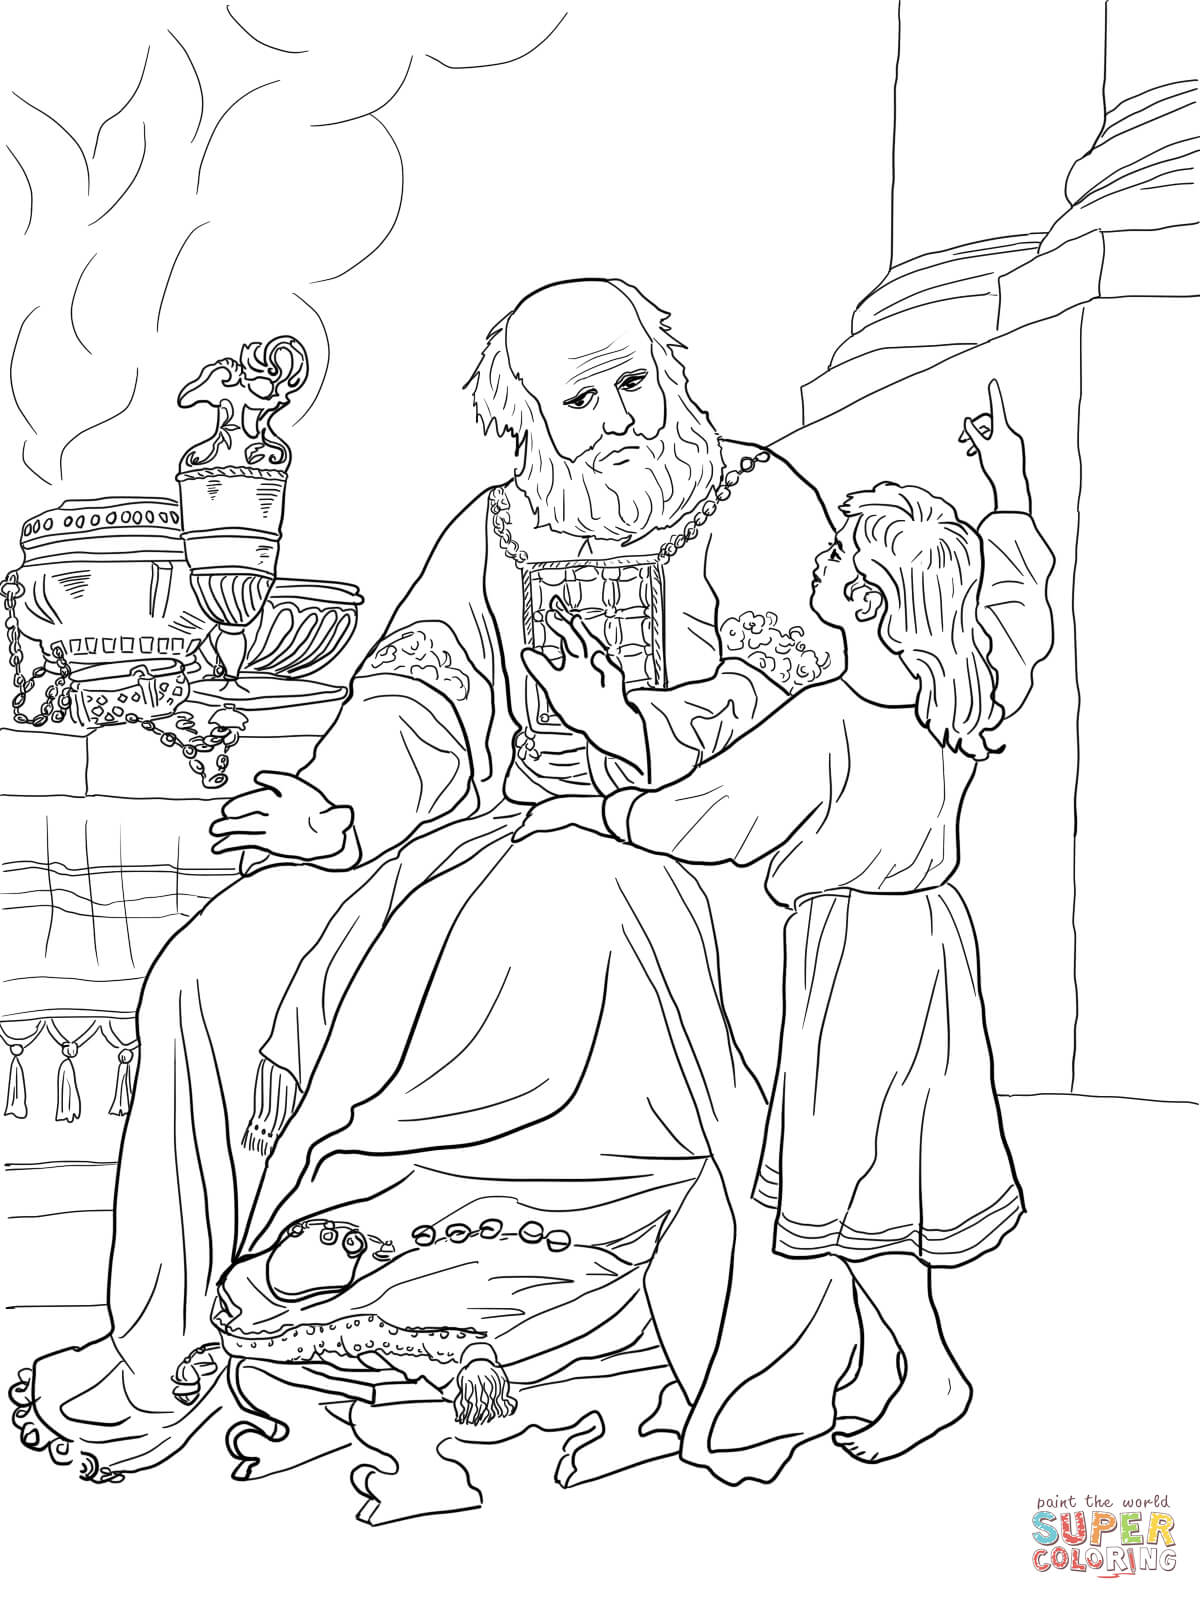 Samuel helps eli coloring page free printable coloring pages